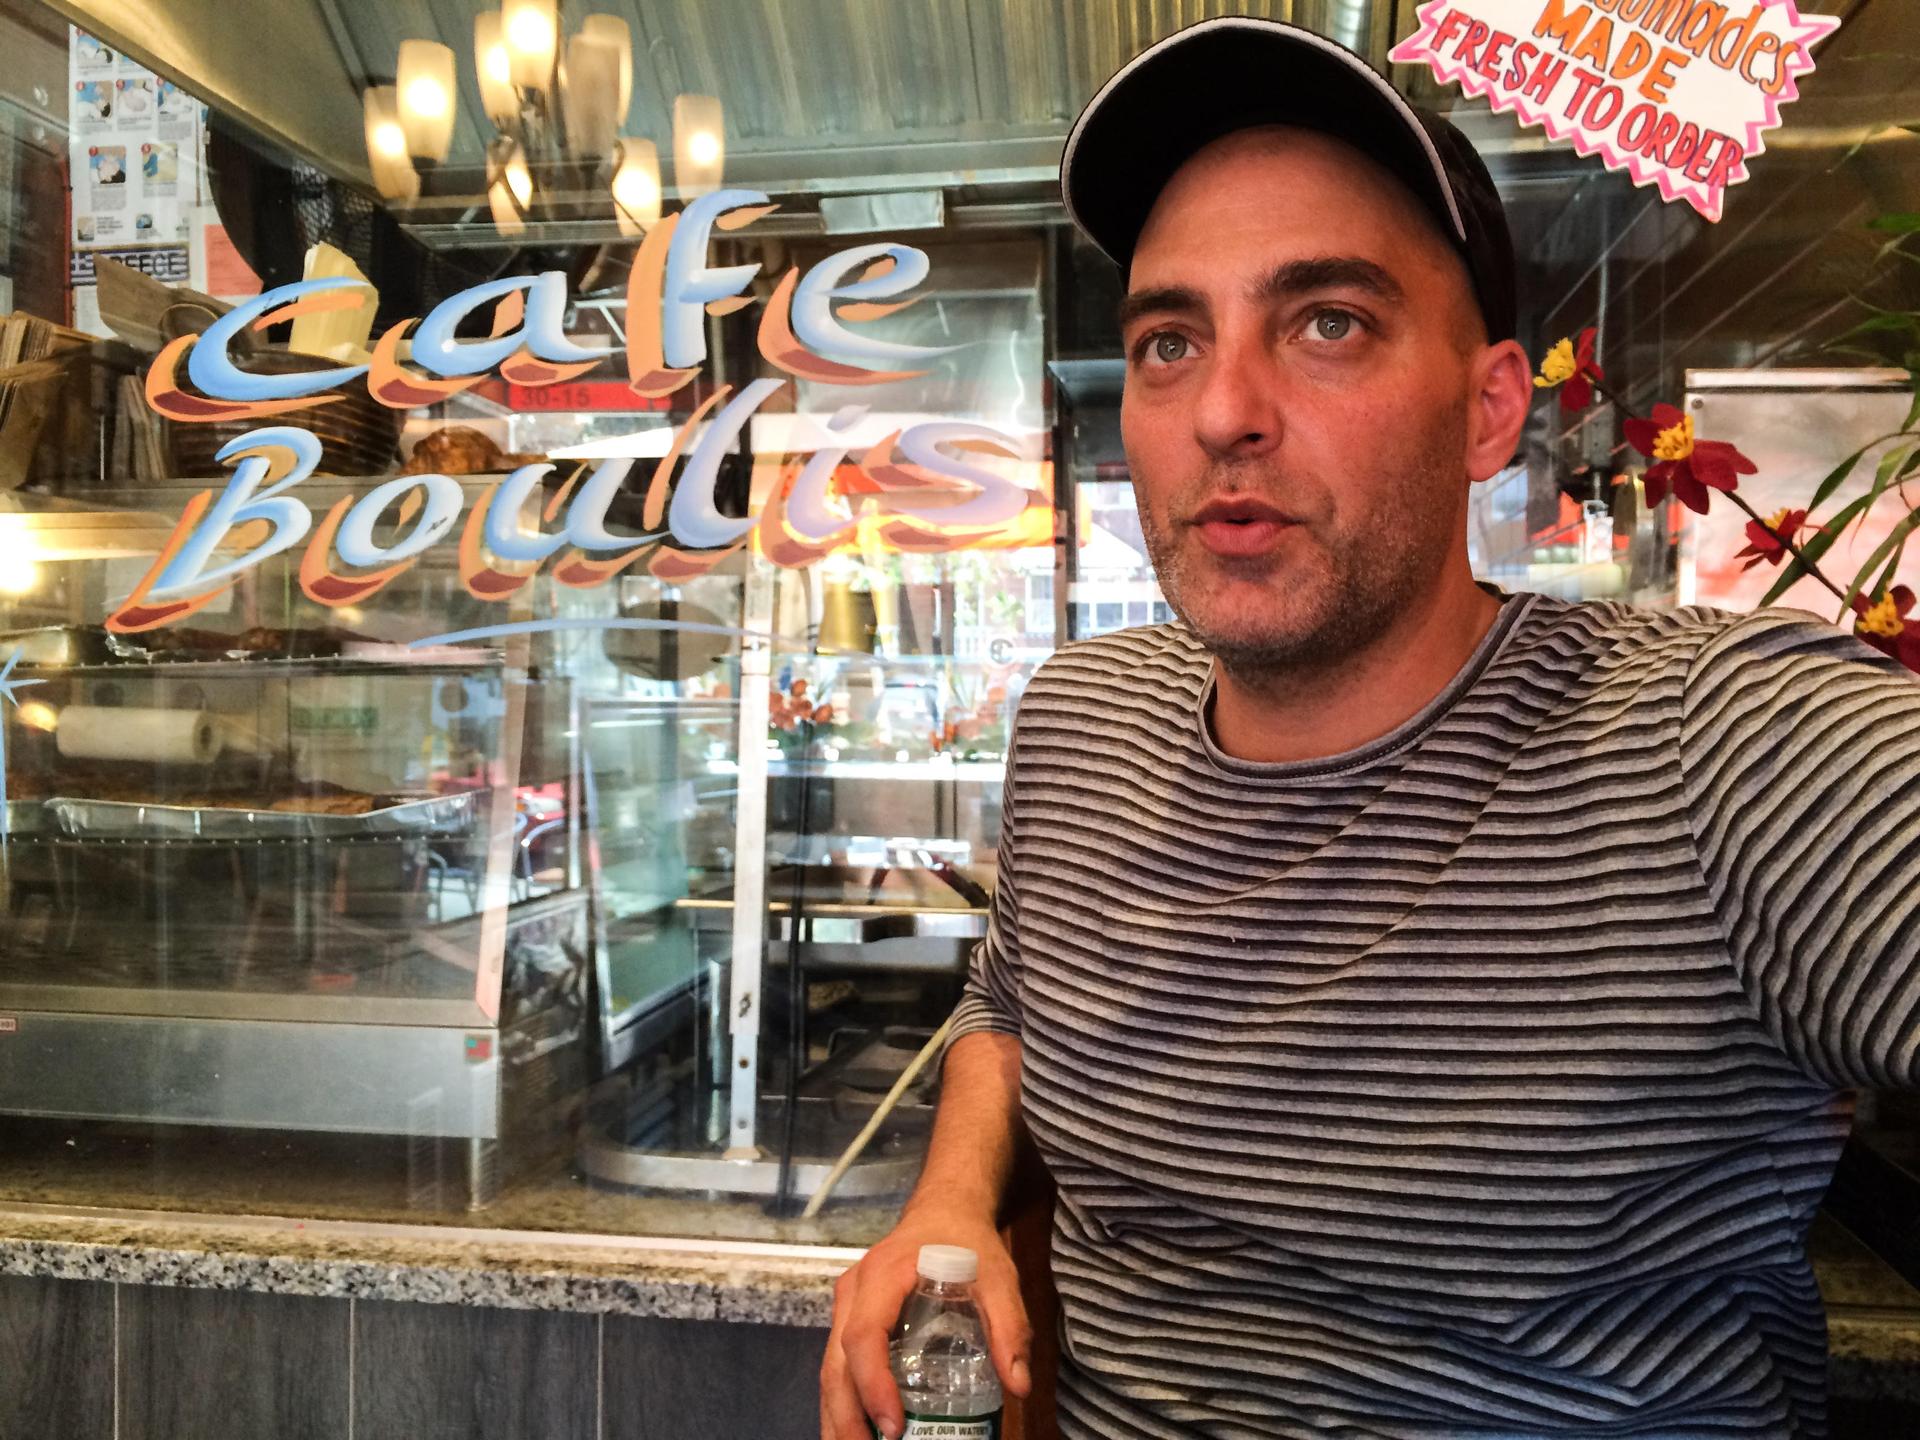 Neokls Melis, 40, took a job at Cafe Boulis just days after arriving from Greece. He left his auto parts company in hopes of earning enough money to bring his family to New York City.